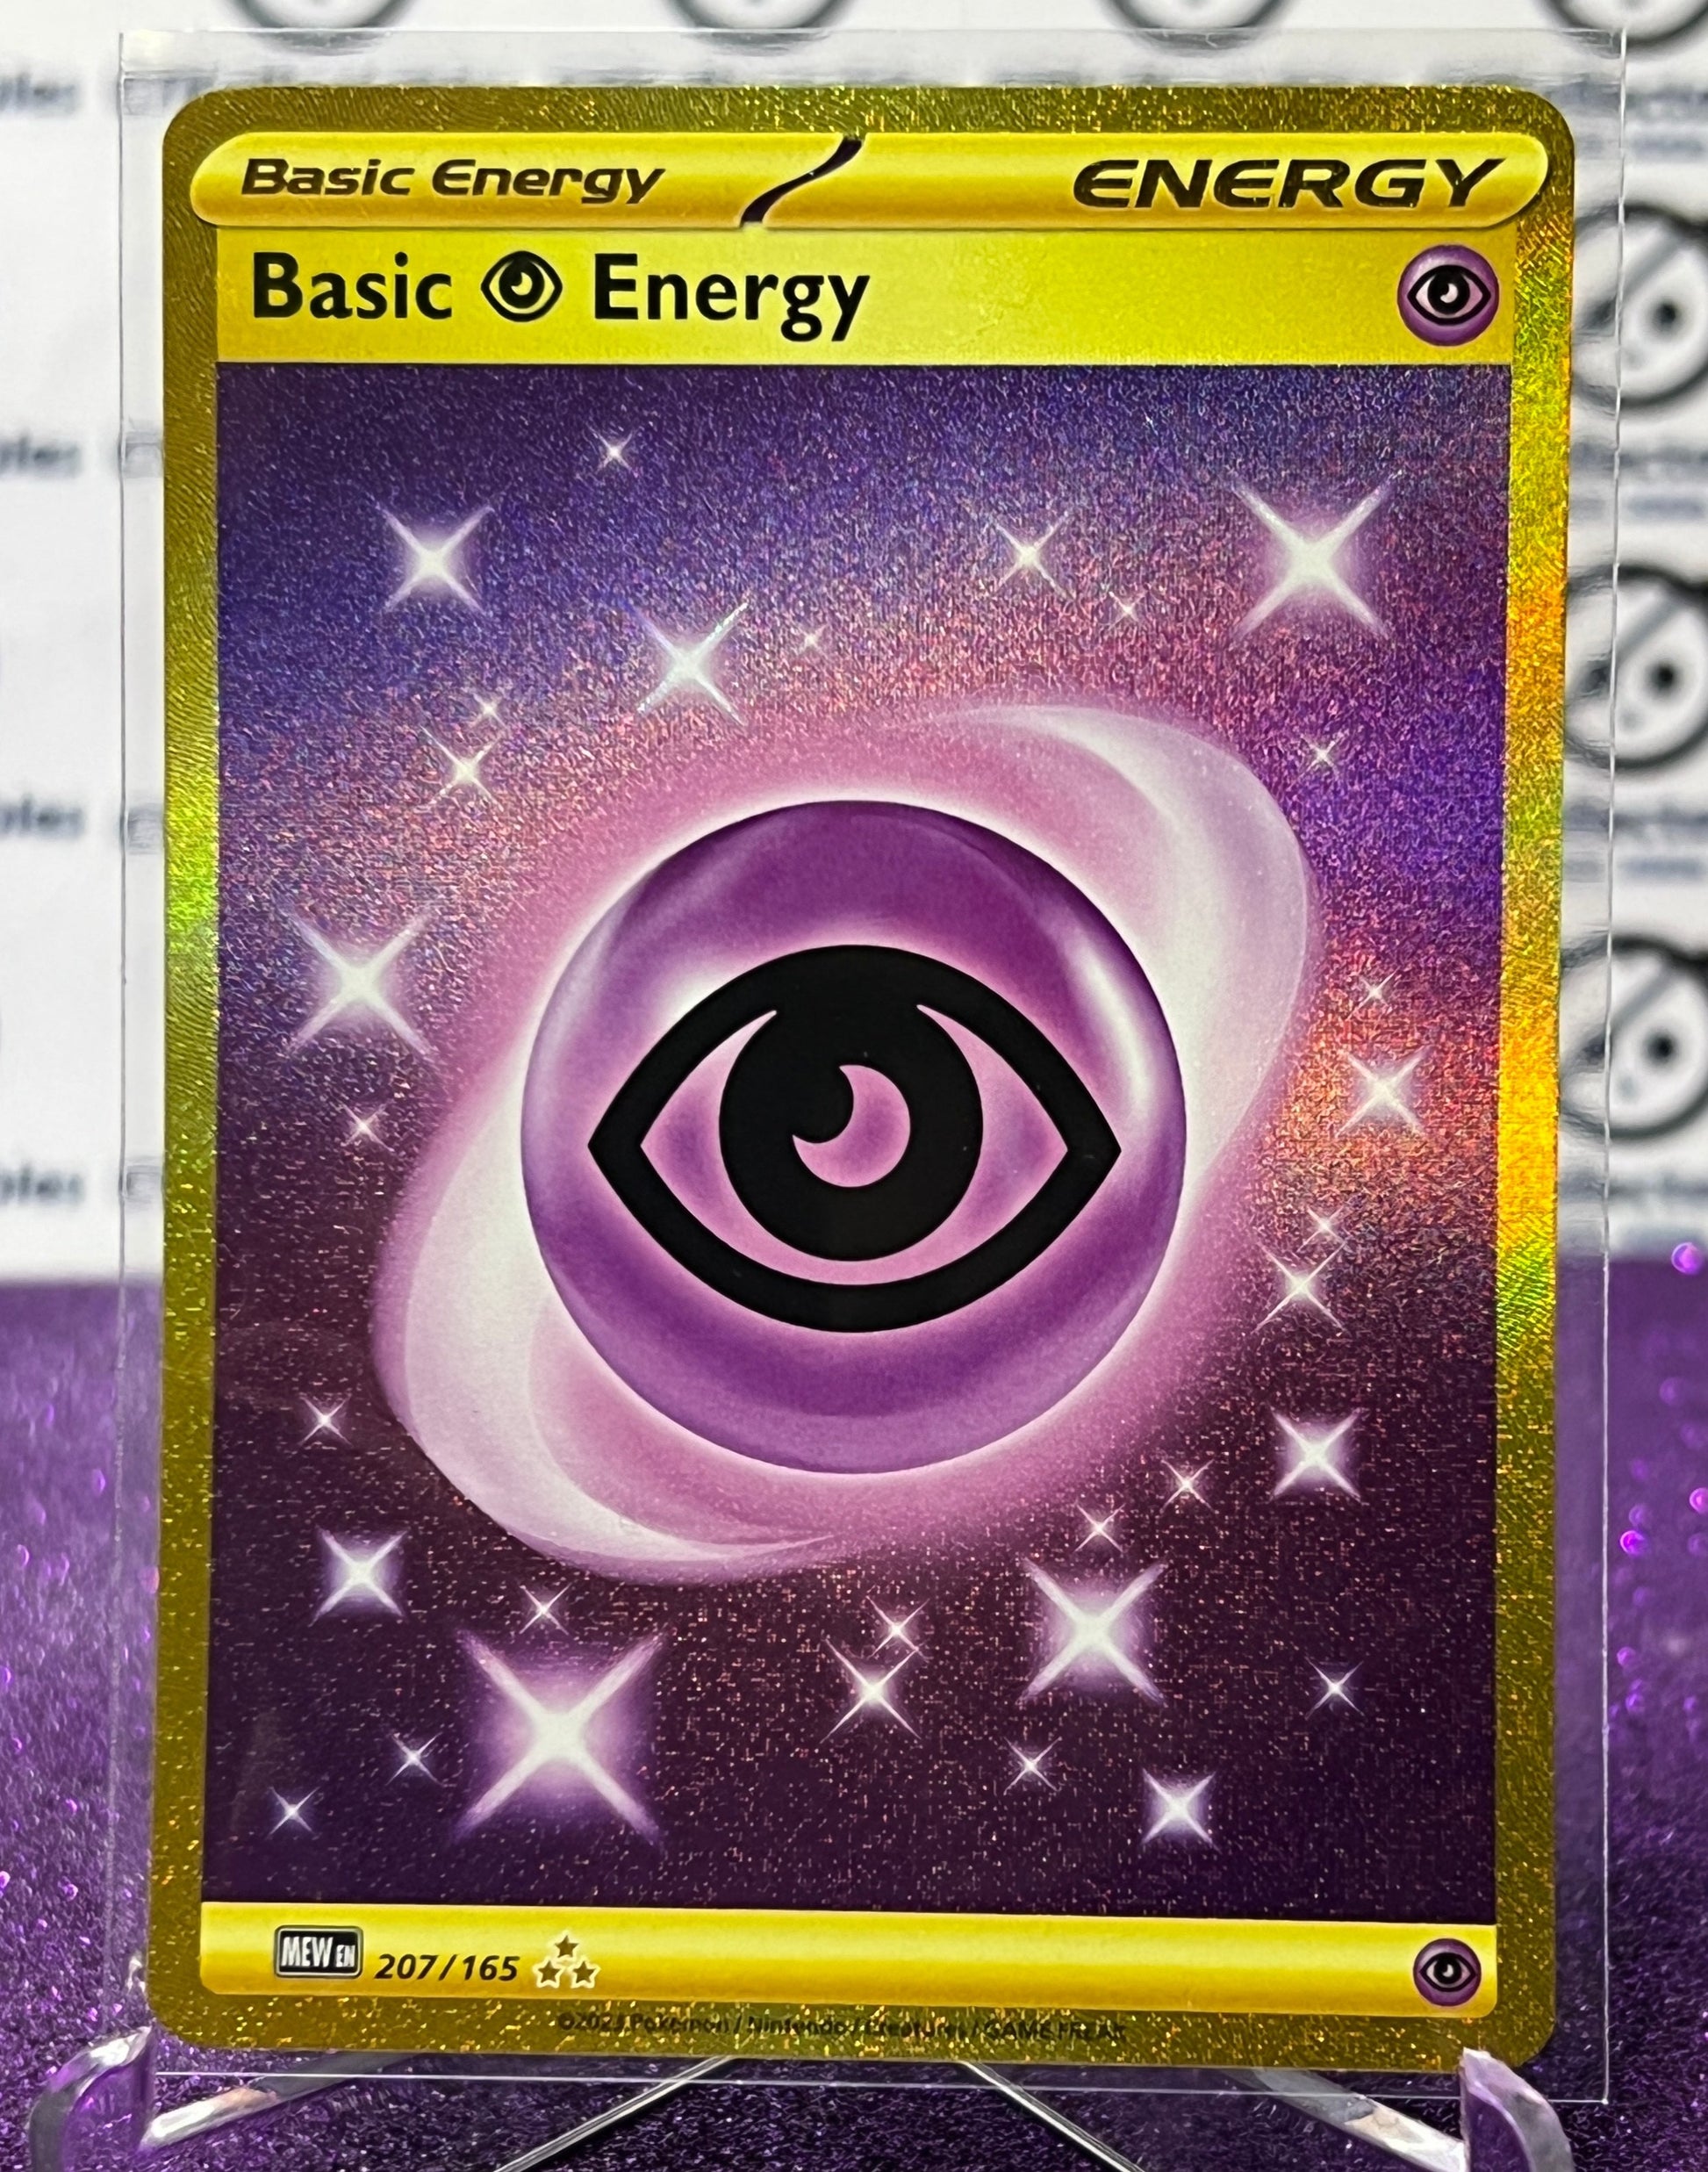 Energy Search - 172/198 - Scarlet & Violet – Card Cavern Trading Cards, LLC